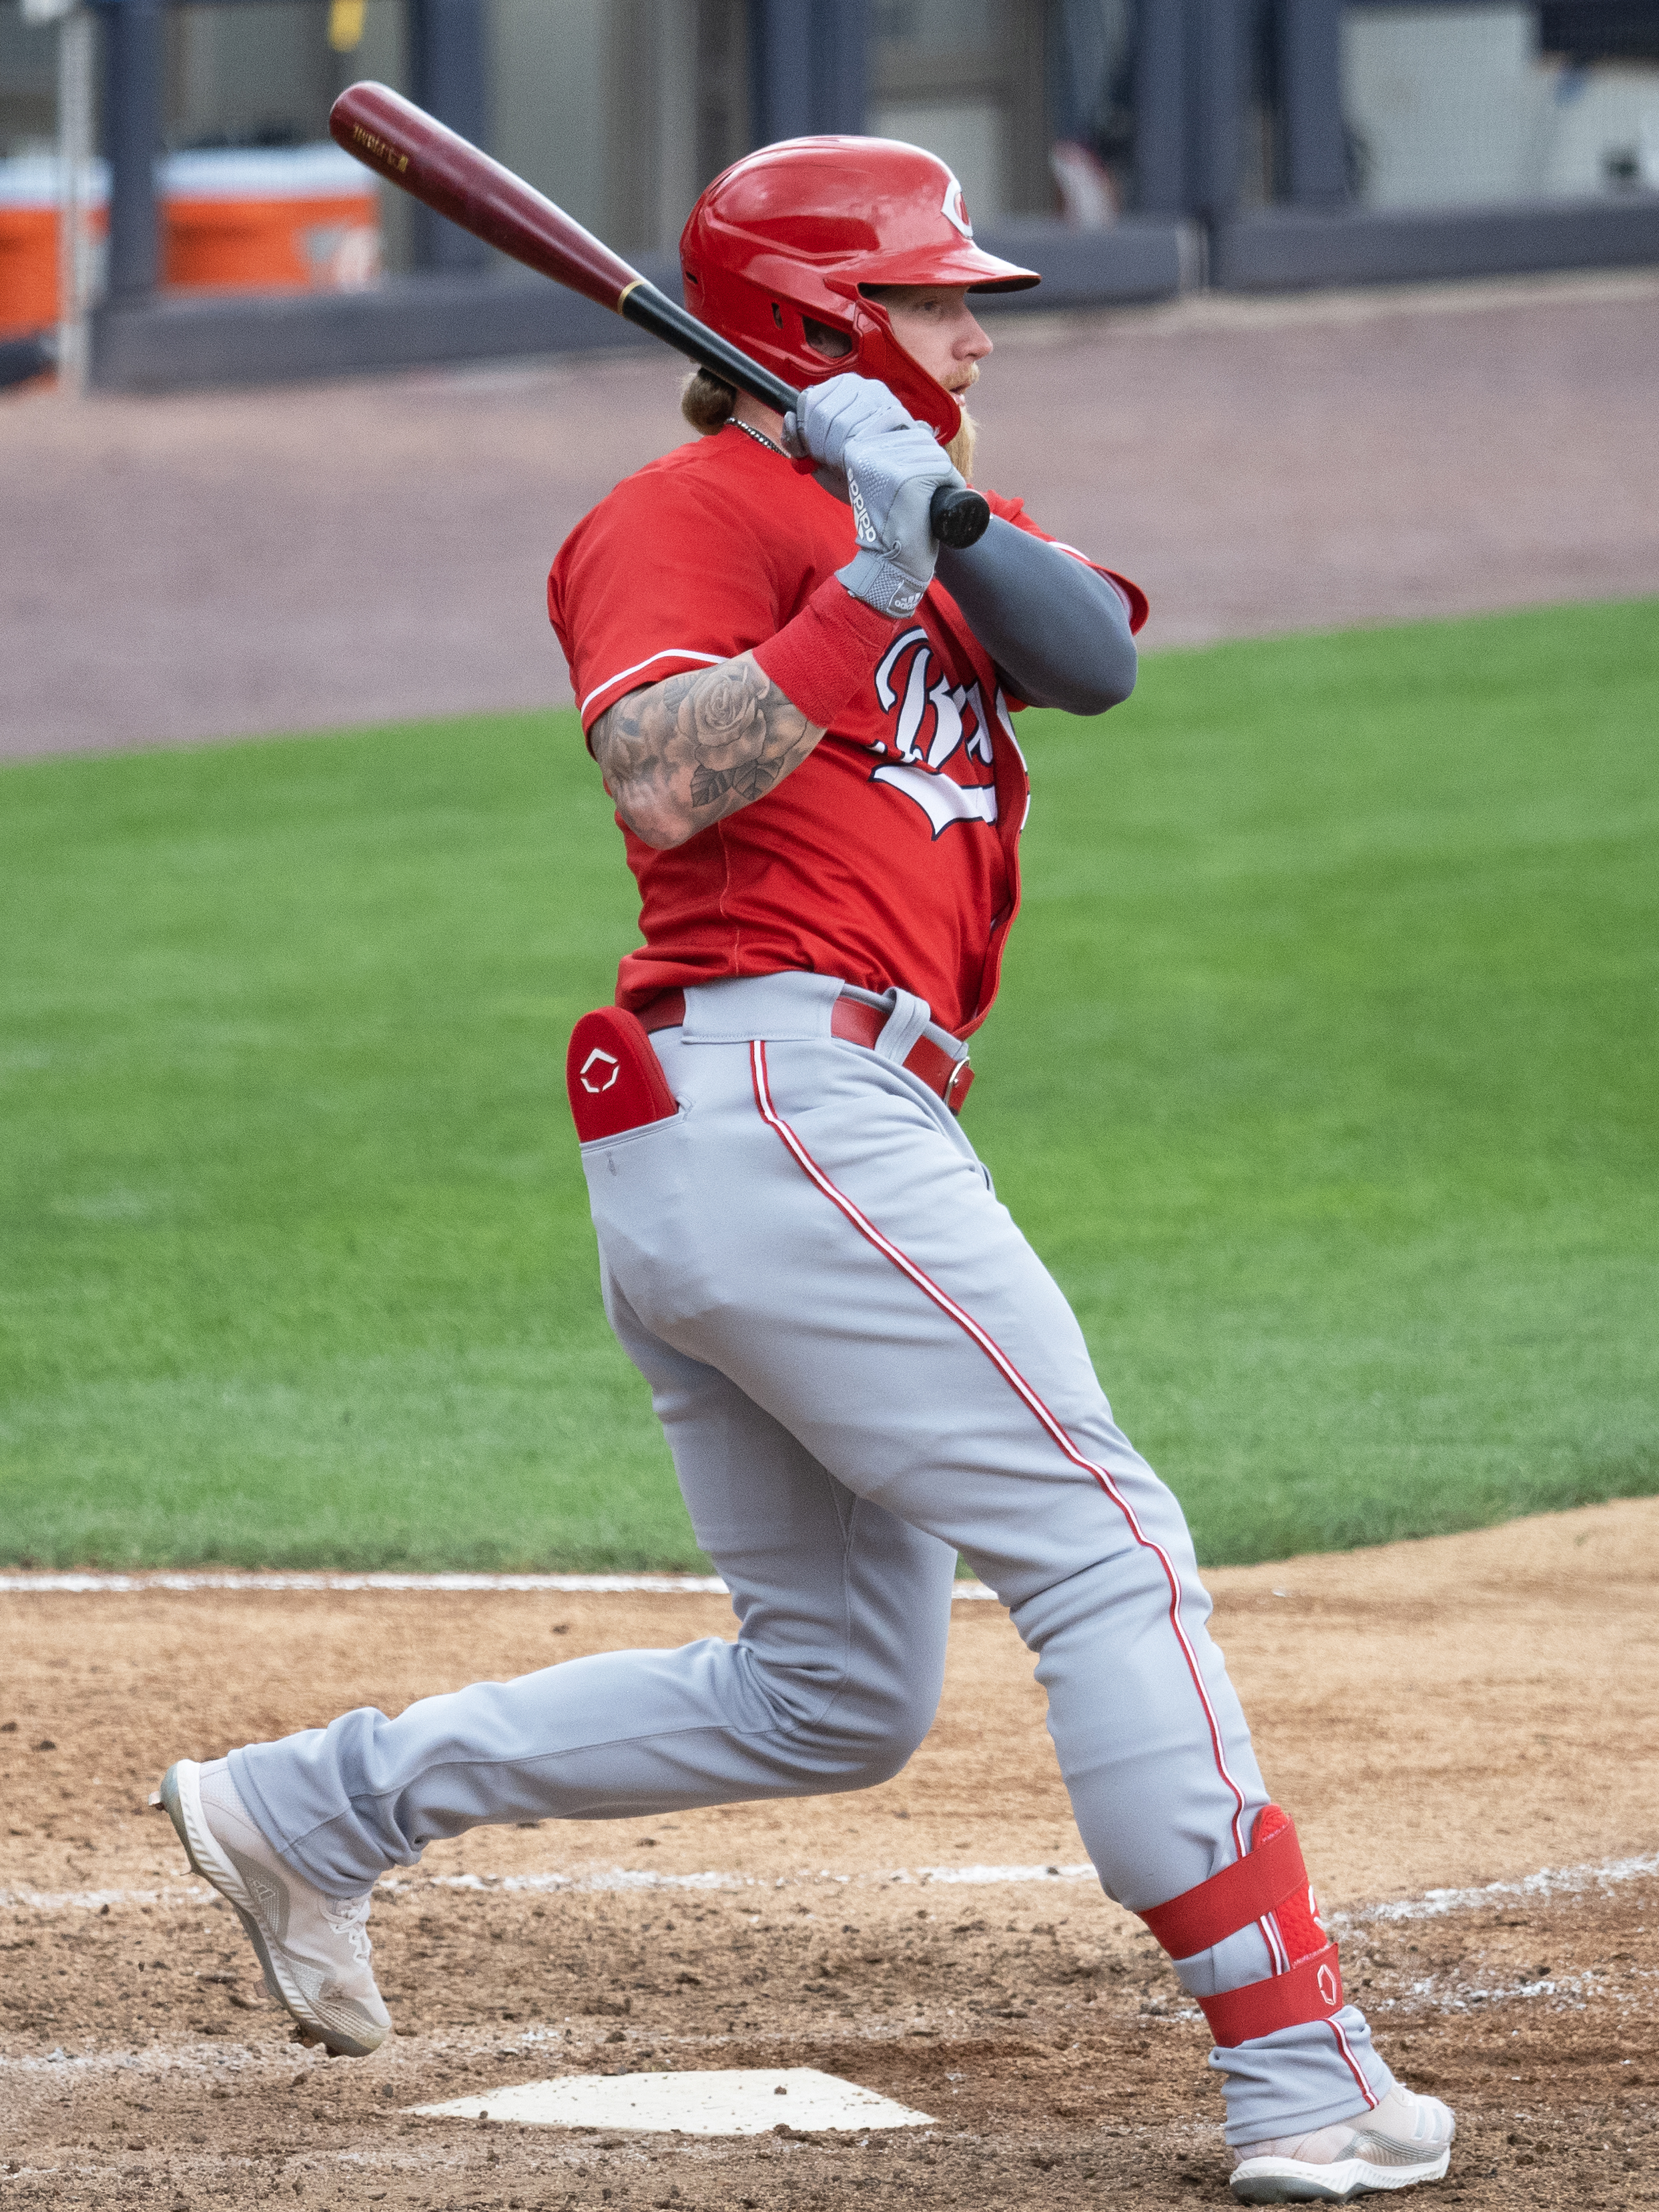 Jesse Winker is returning to the Reds on Friday - Redleg Nation